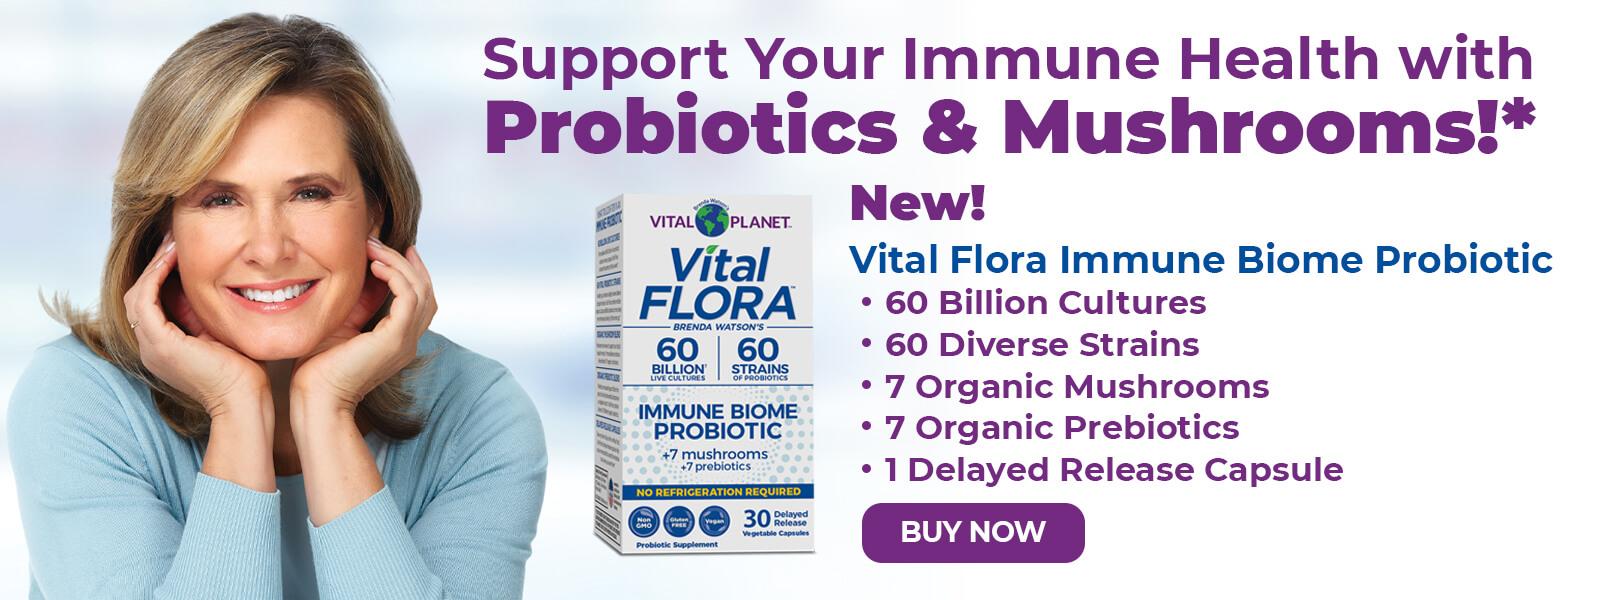 Support your immune health with prebiotics and mushrooms - Buy Now